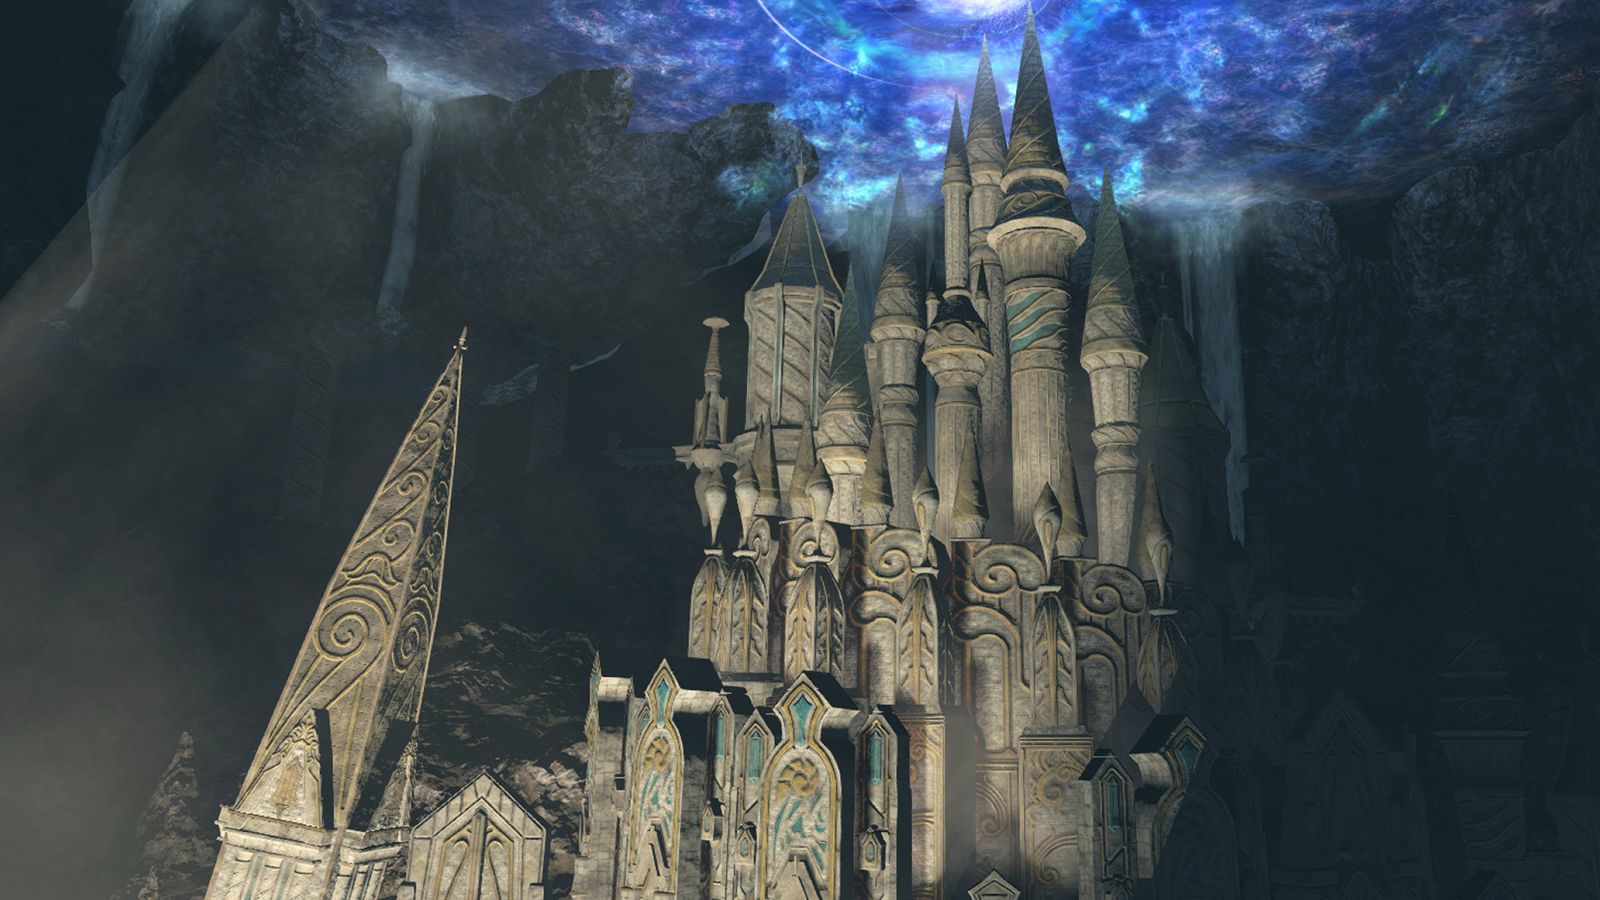 An image of the Antitower, a level 60 dungeon useful for the Shadowbringers' Relic Weapon grind. The Antitower is a beautiful, elegant structure in a mystical landscape.